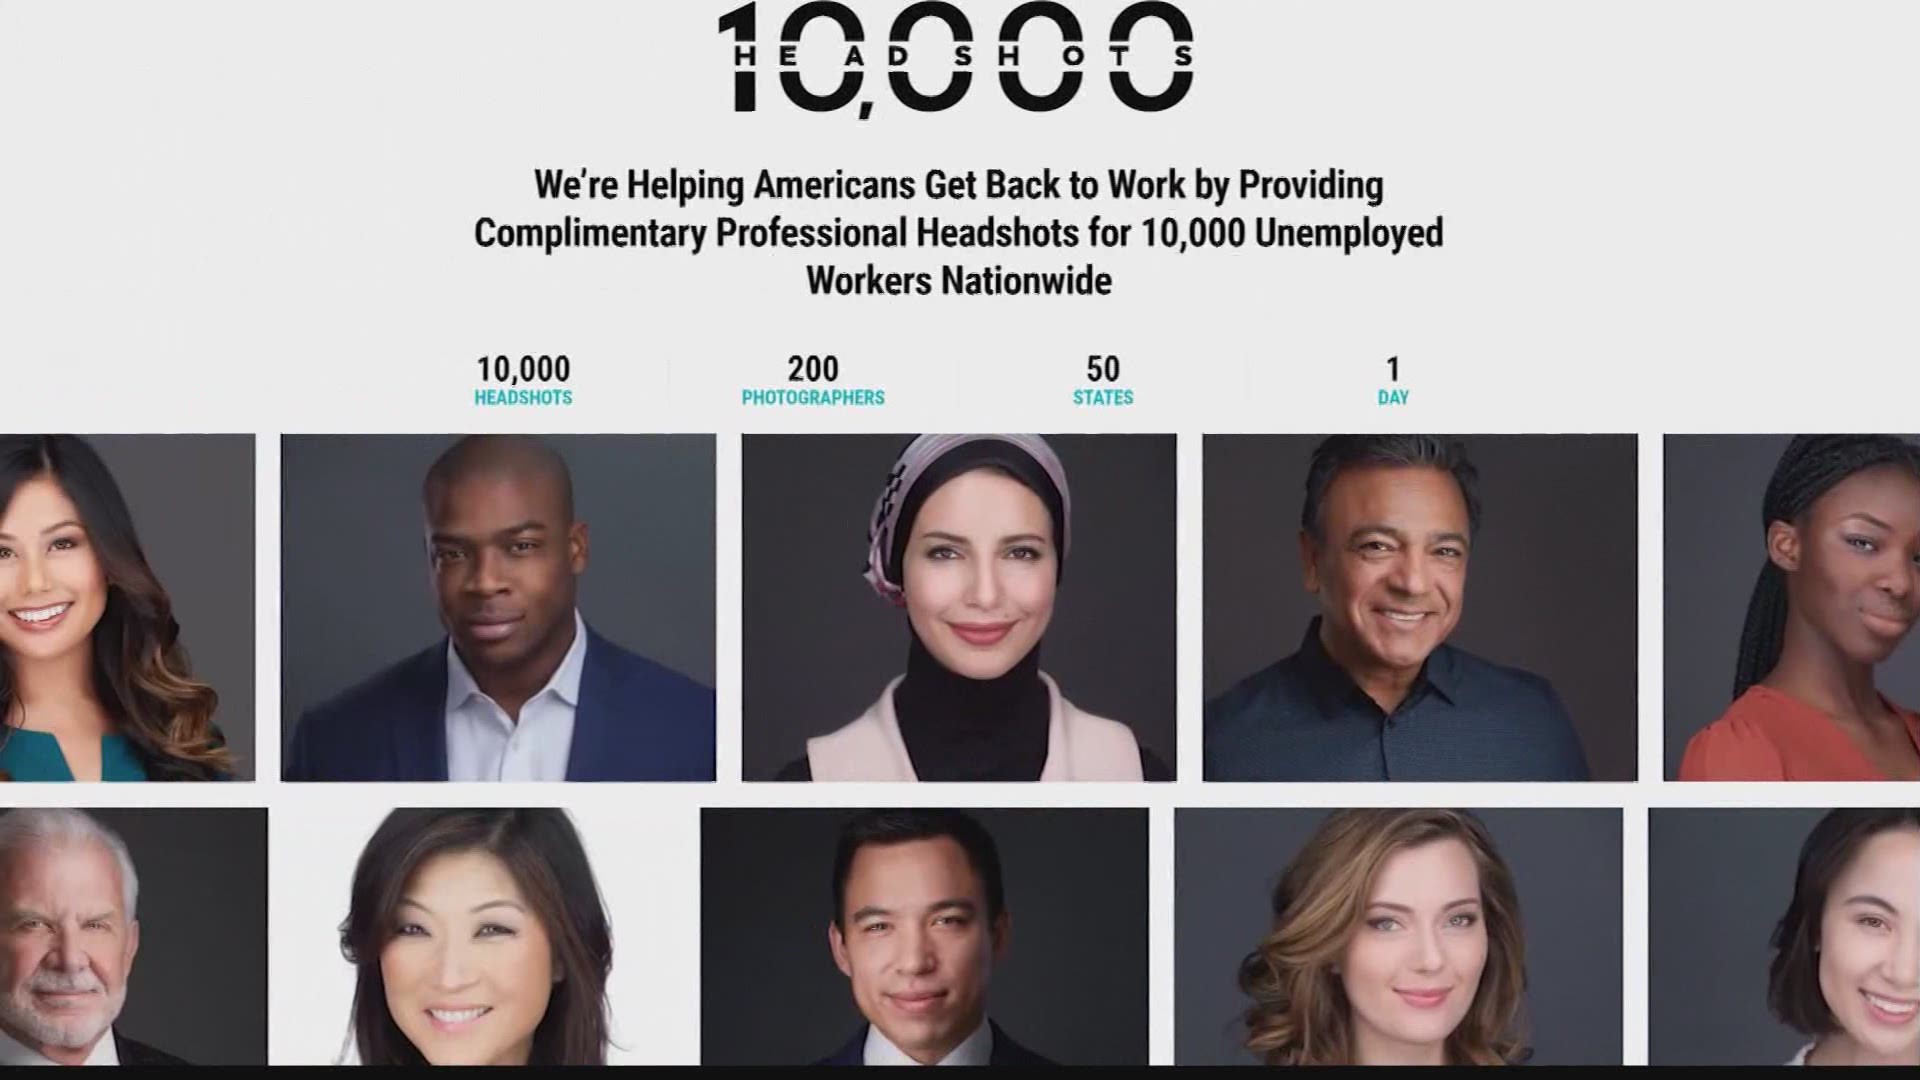 Headshot Booker is teaming with photographers across the U.S. to offer free head shots to 10,000 Americans who lost their jobs during the pandemic.